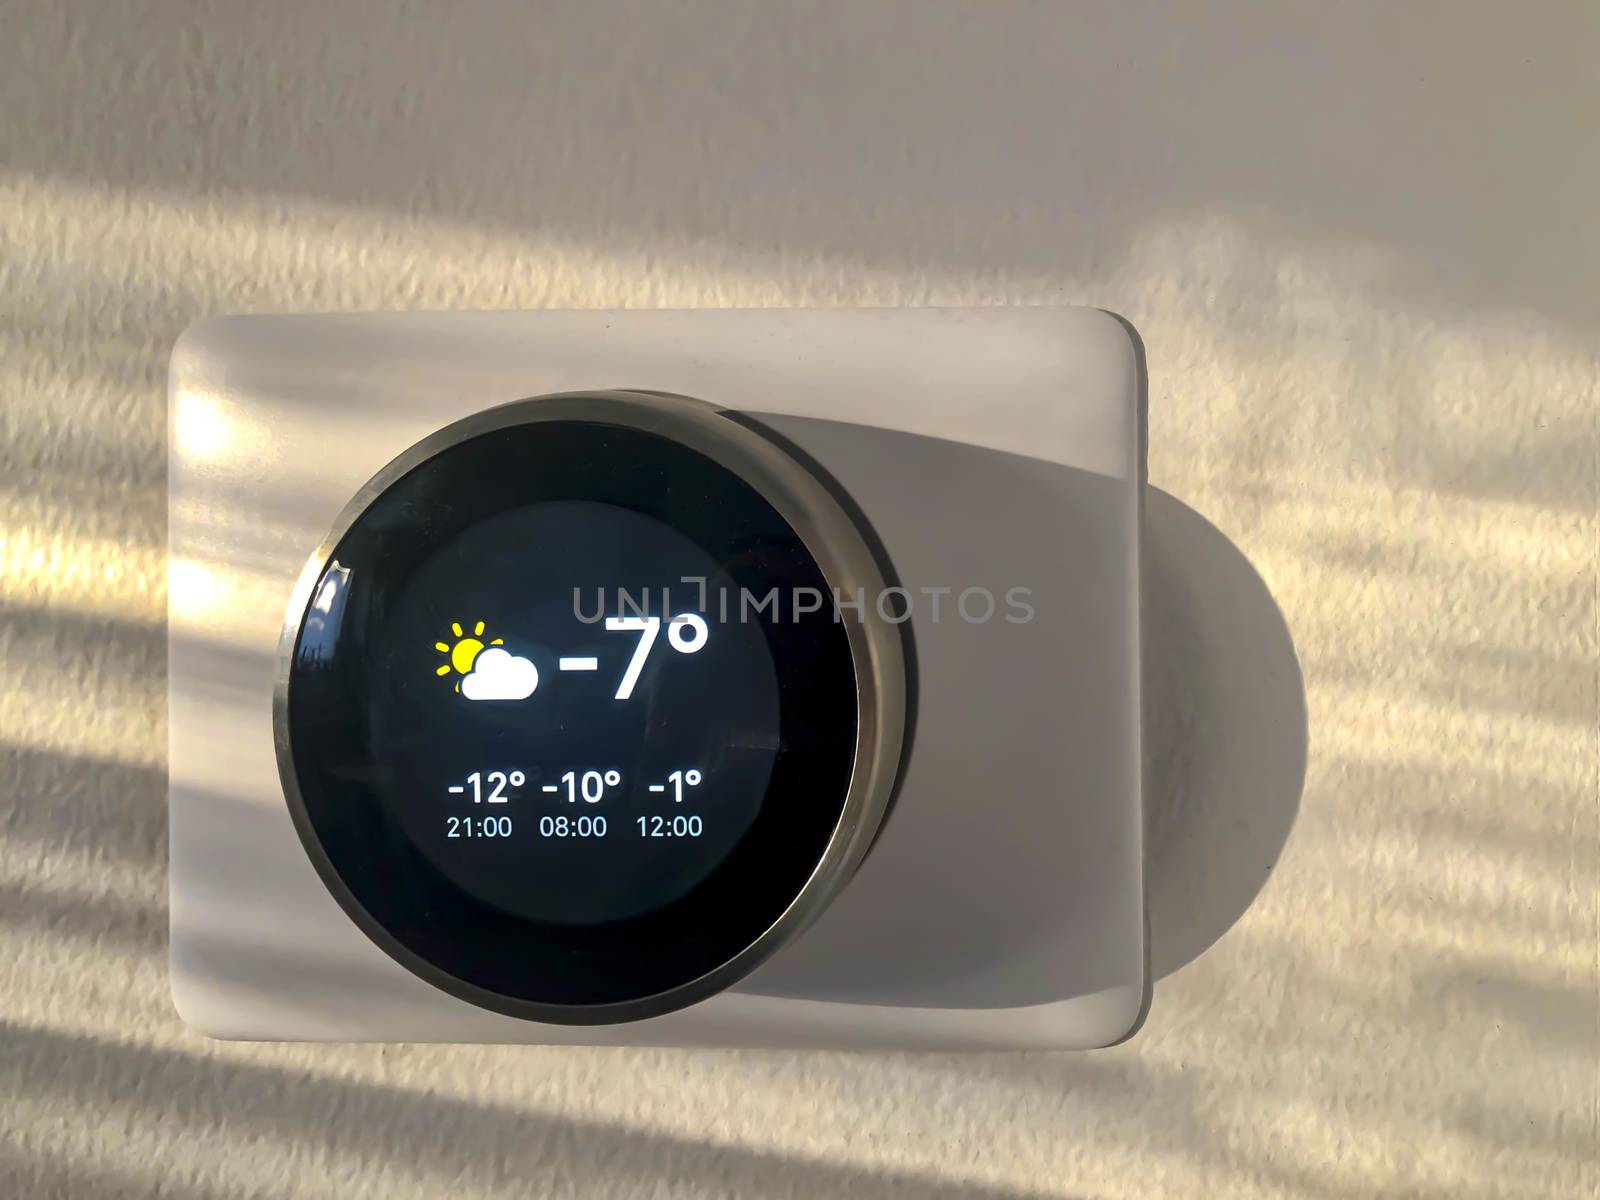 Smart Thermostat with the outside temperature during winter during the afternoon sunset by oasisamuel